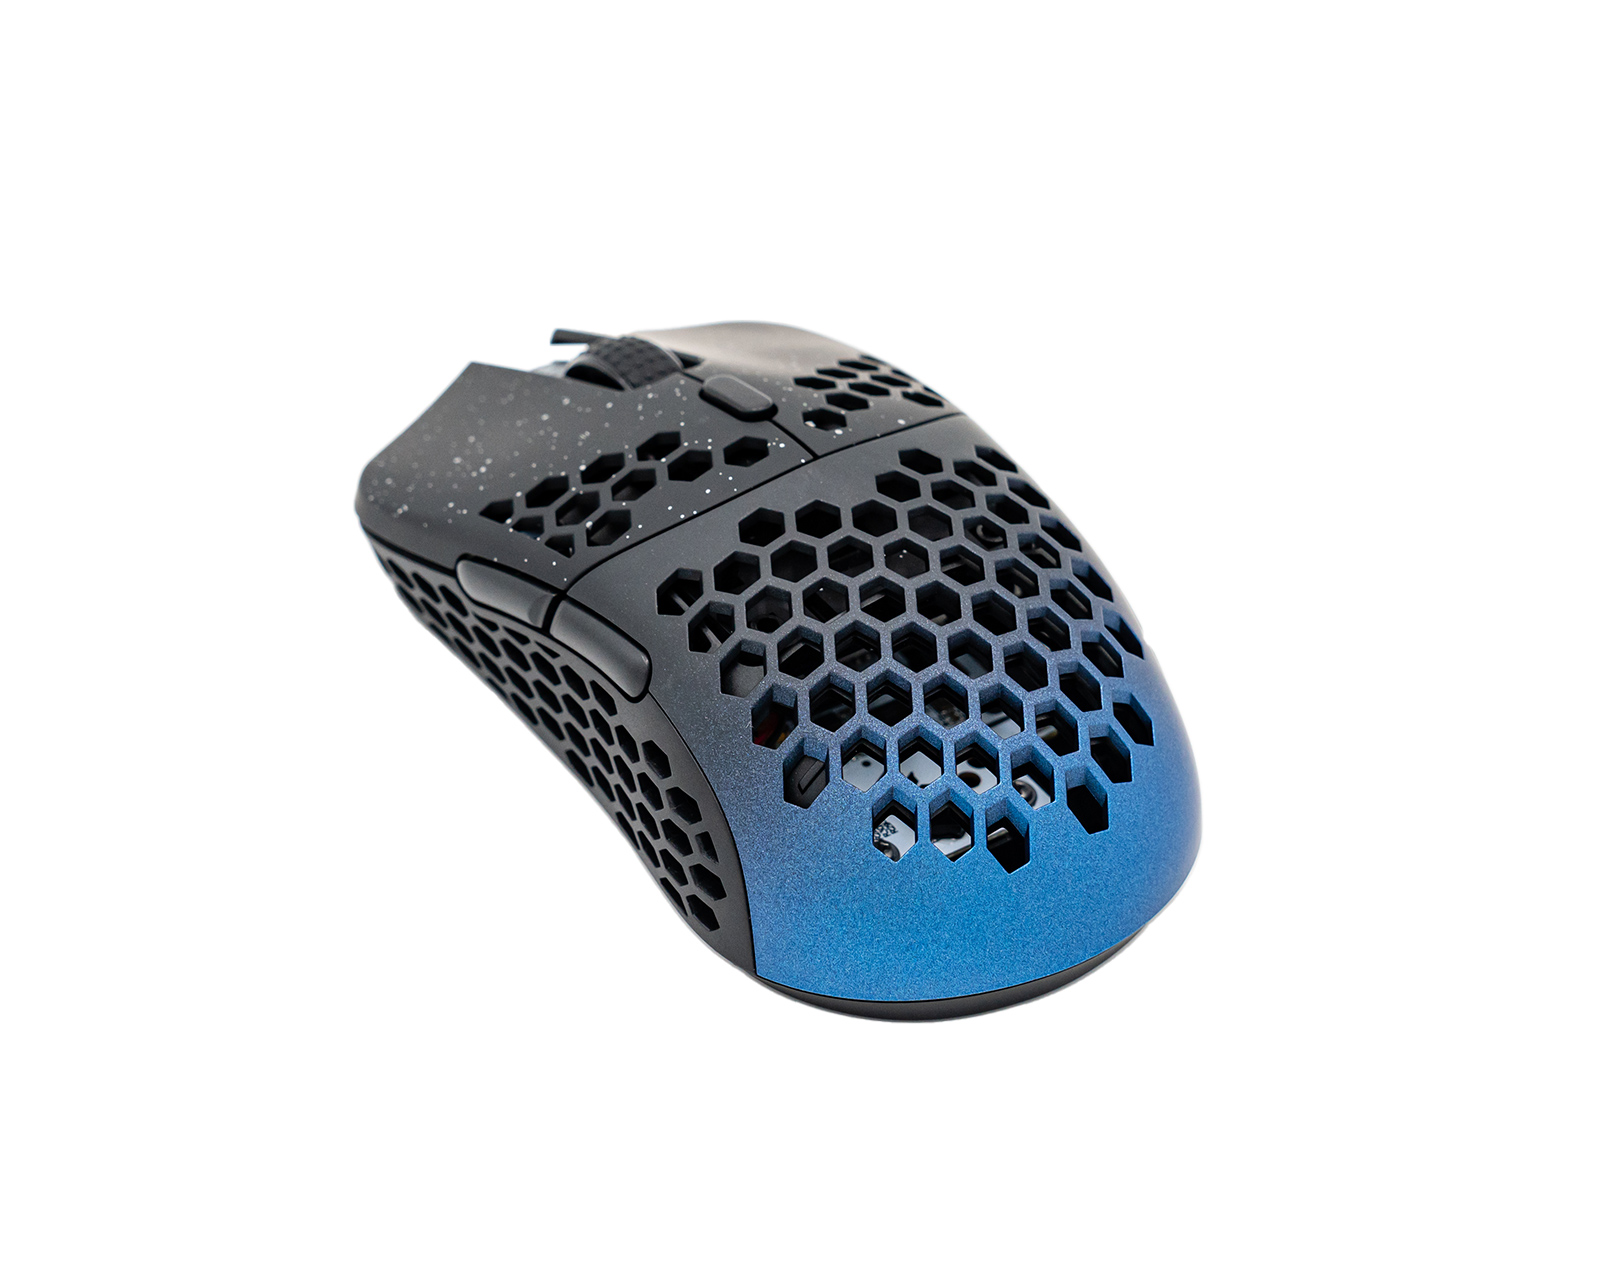 G-Wolves Hati S Wireless Gaming Mouse - Stardust Blue - us 